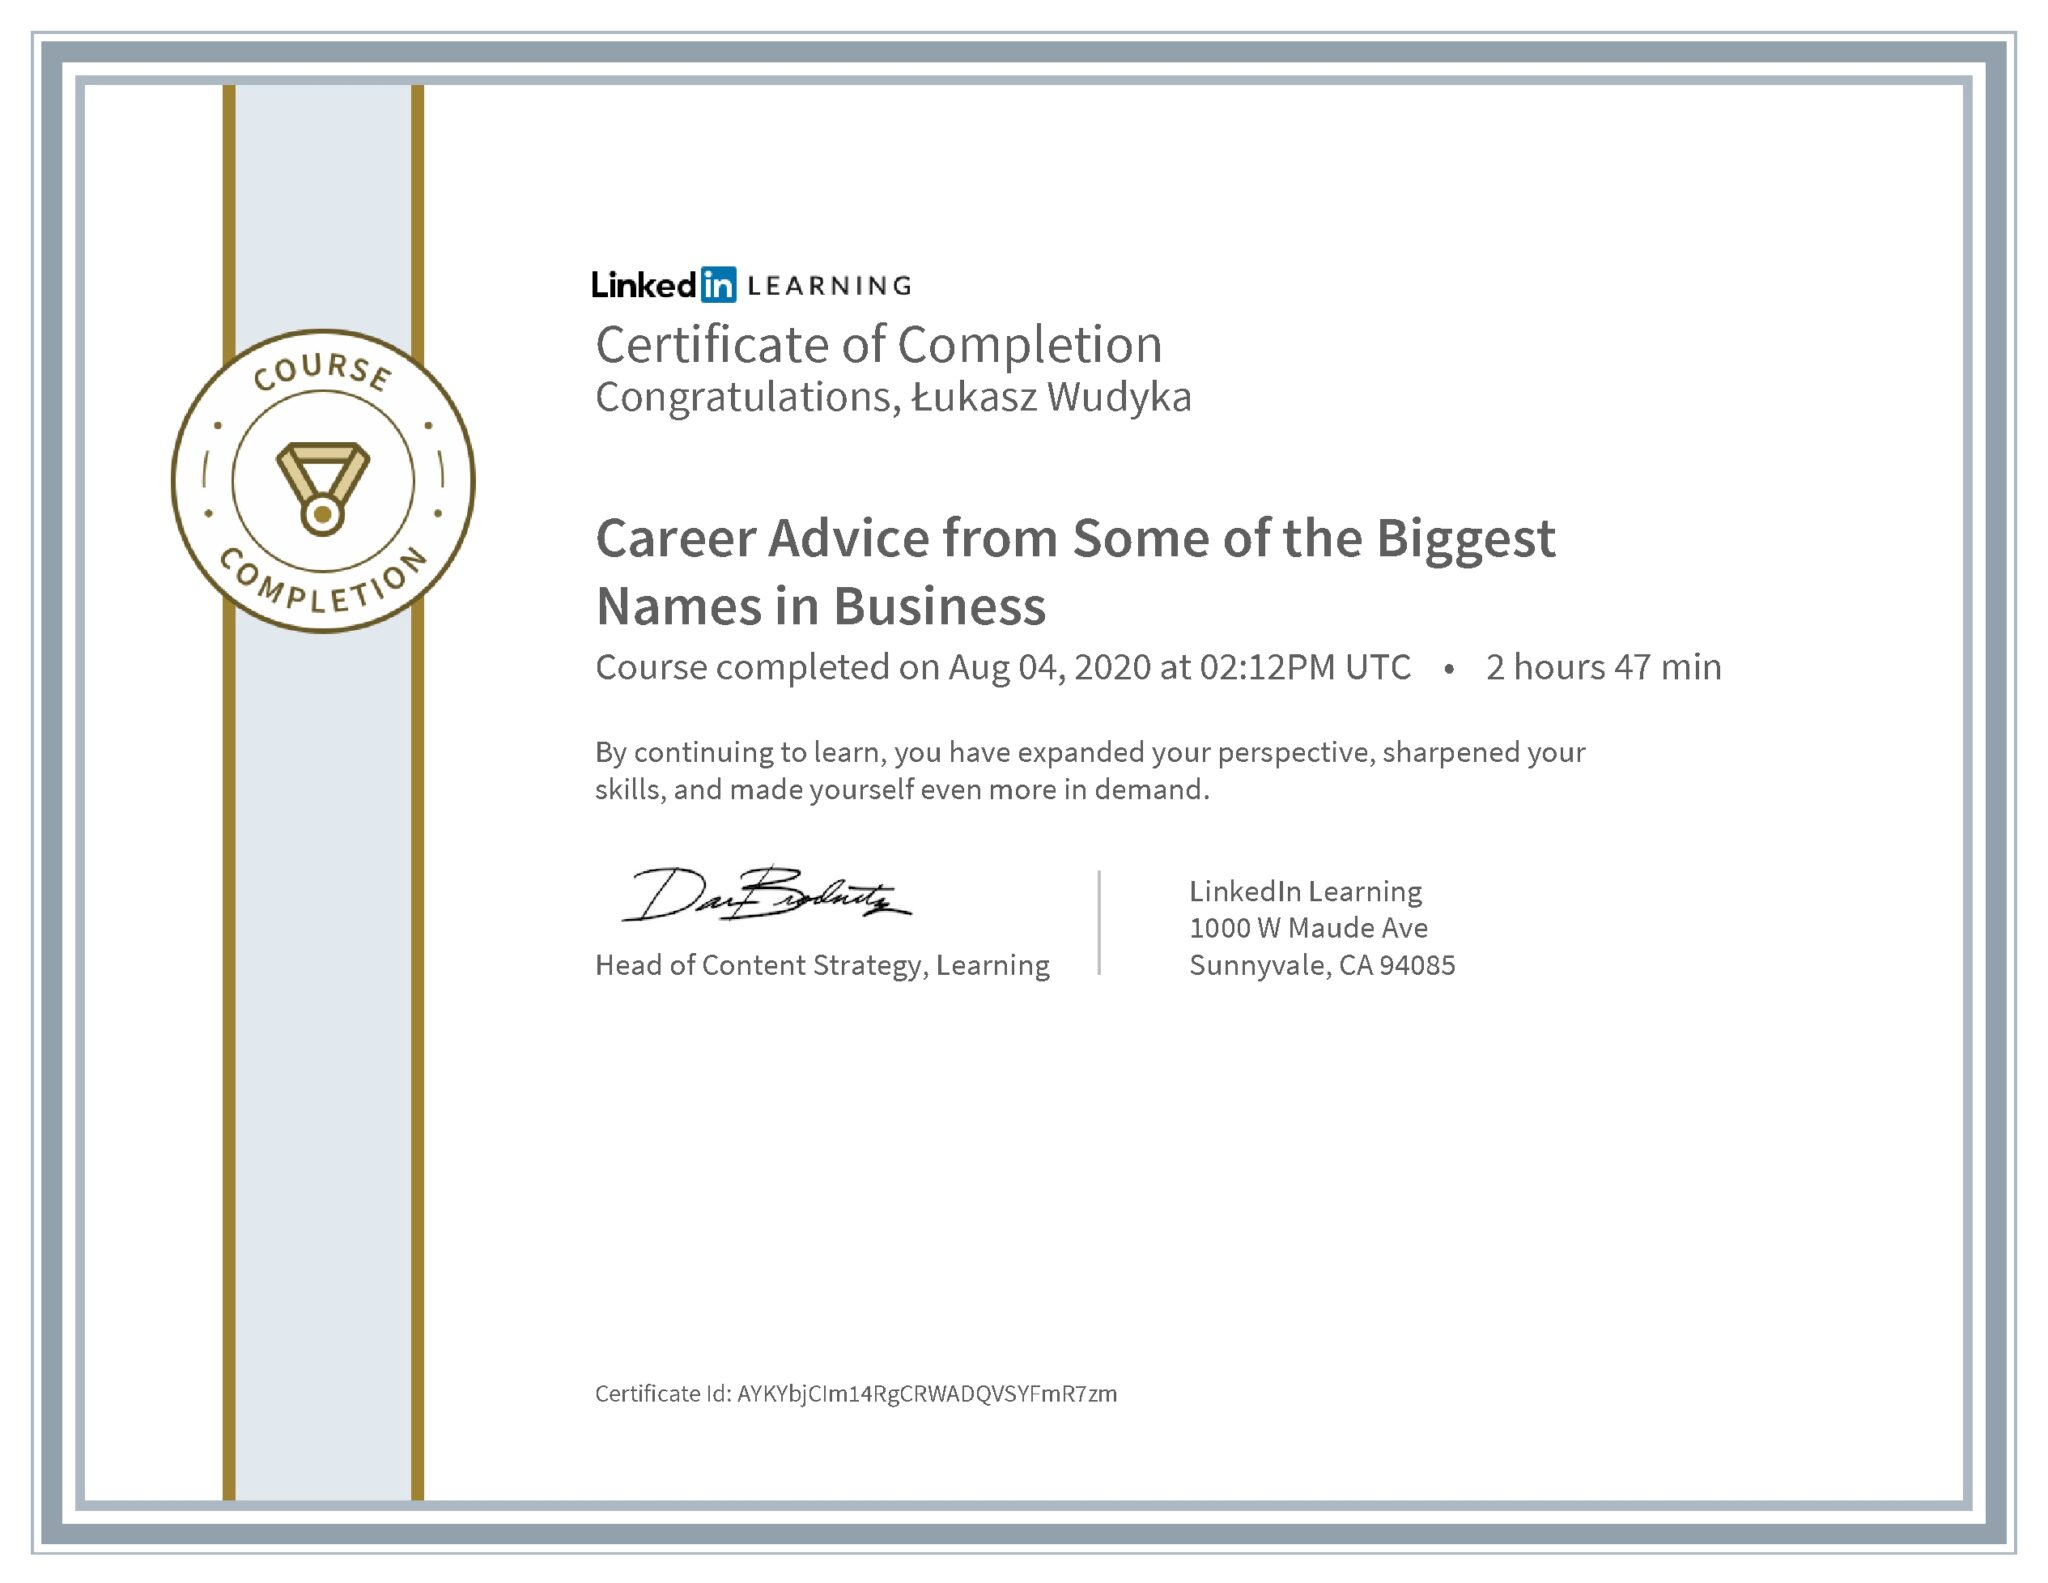 Łukasz Wudyka certyfikat LinkedIn Career Advice from Some of the Biggest Names in Business